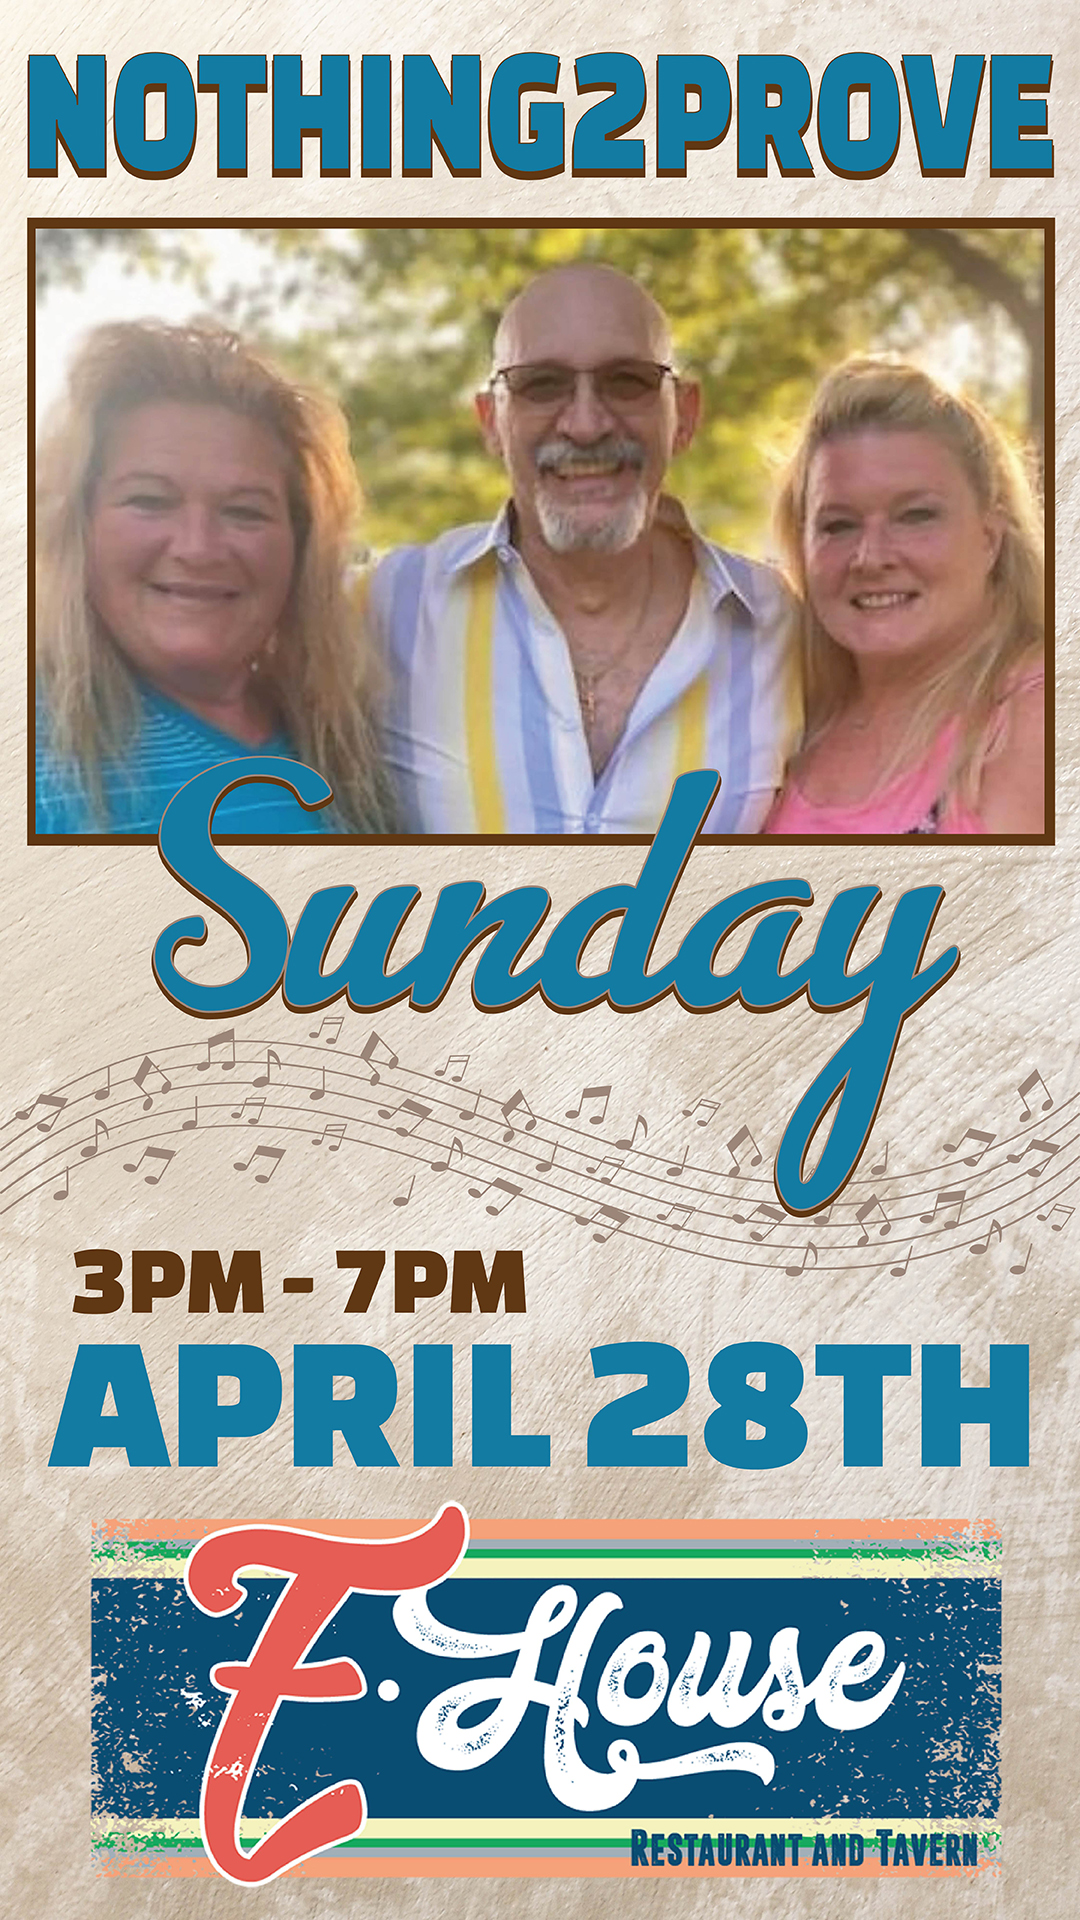 Event poster featuring two women and a man smiling outdoors, advertising "nothing2prove" band playing at e. house tavern on sunday, april 28th, from 3-7 pm.